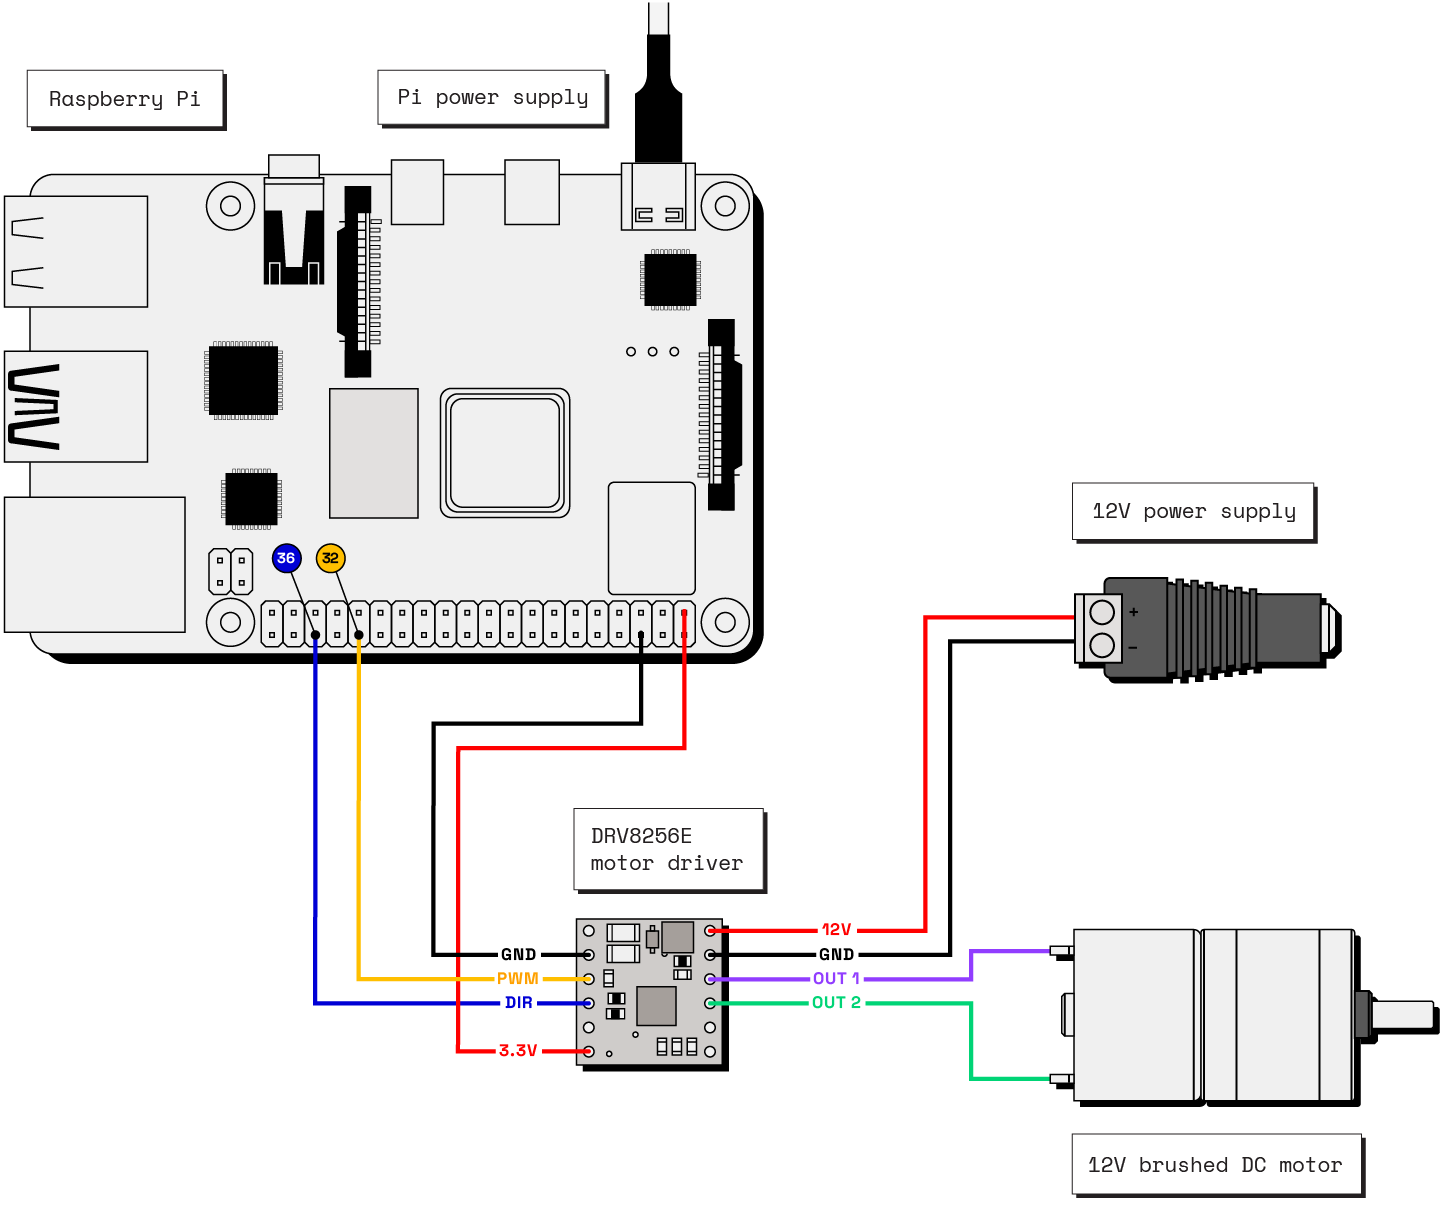 An example wiring diagram showing a Raspberry Pi, 12V power supply, DRV8256E motor driver, and 12V brushed DC motor. The logic side of the driver is connected to the Pi’s ground and 3.3V pins. The driver pin for PWM goes to pin 32 on the Pi and the direction pin goes to pin 36 on the Pi. The motor side of the motor driver is connected to the ground and 12V terminals of a power supply and the OUT1 and OUT2 pins go to the two terminals of the motor.